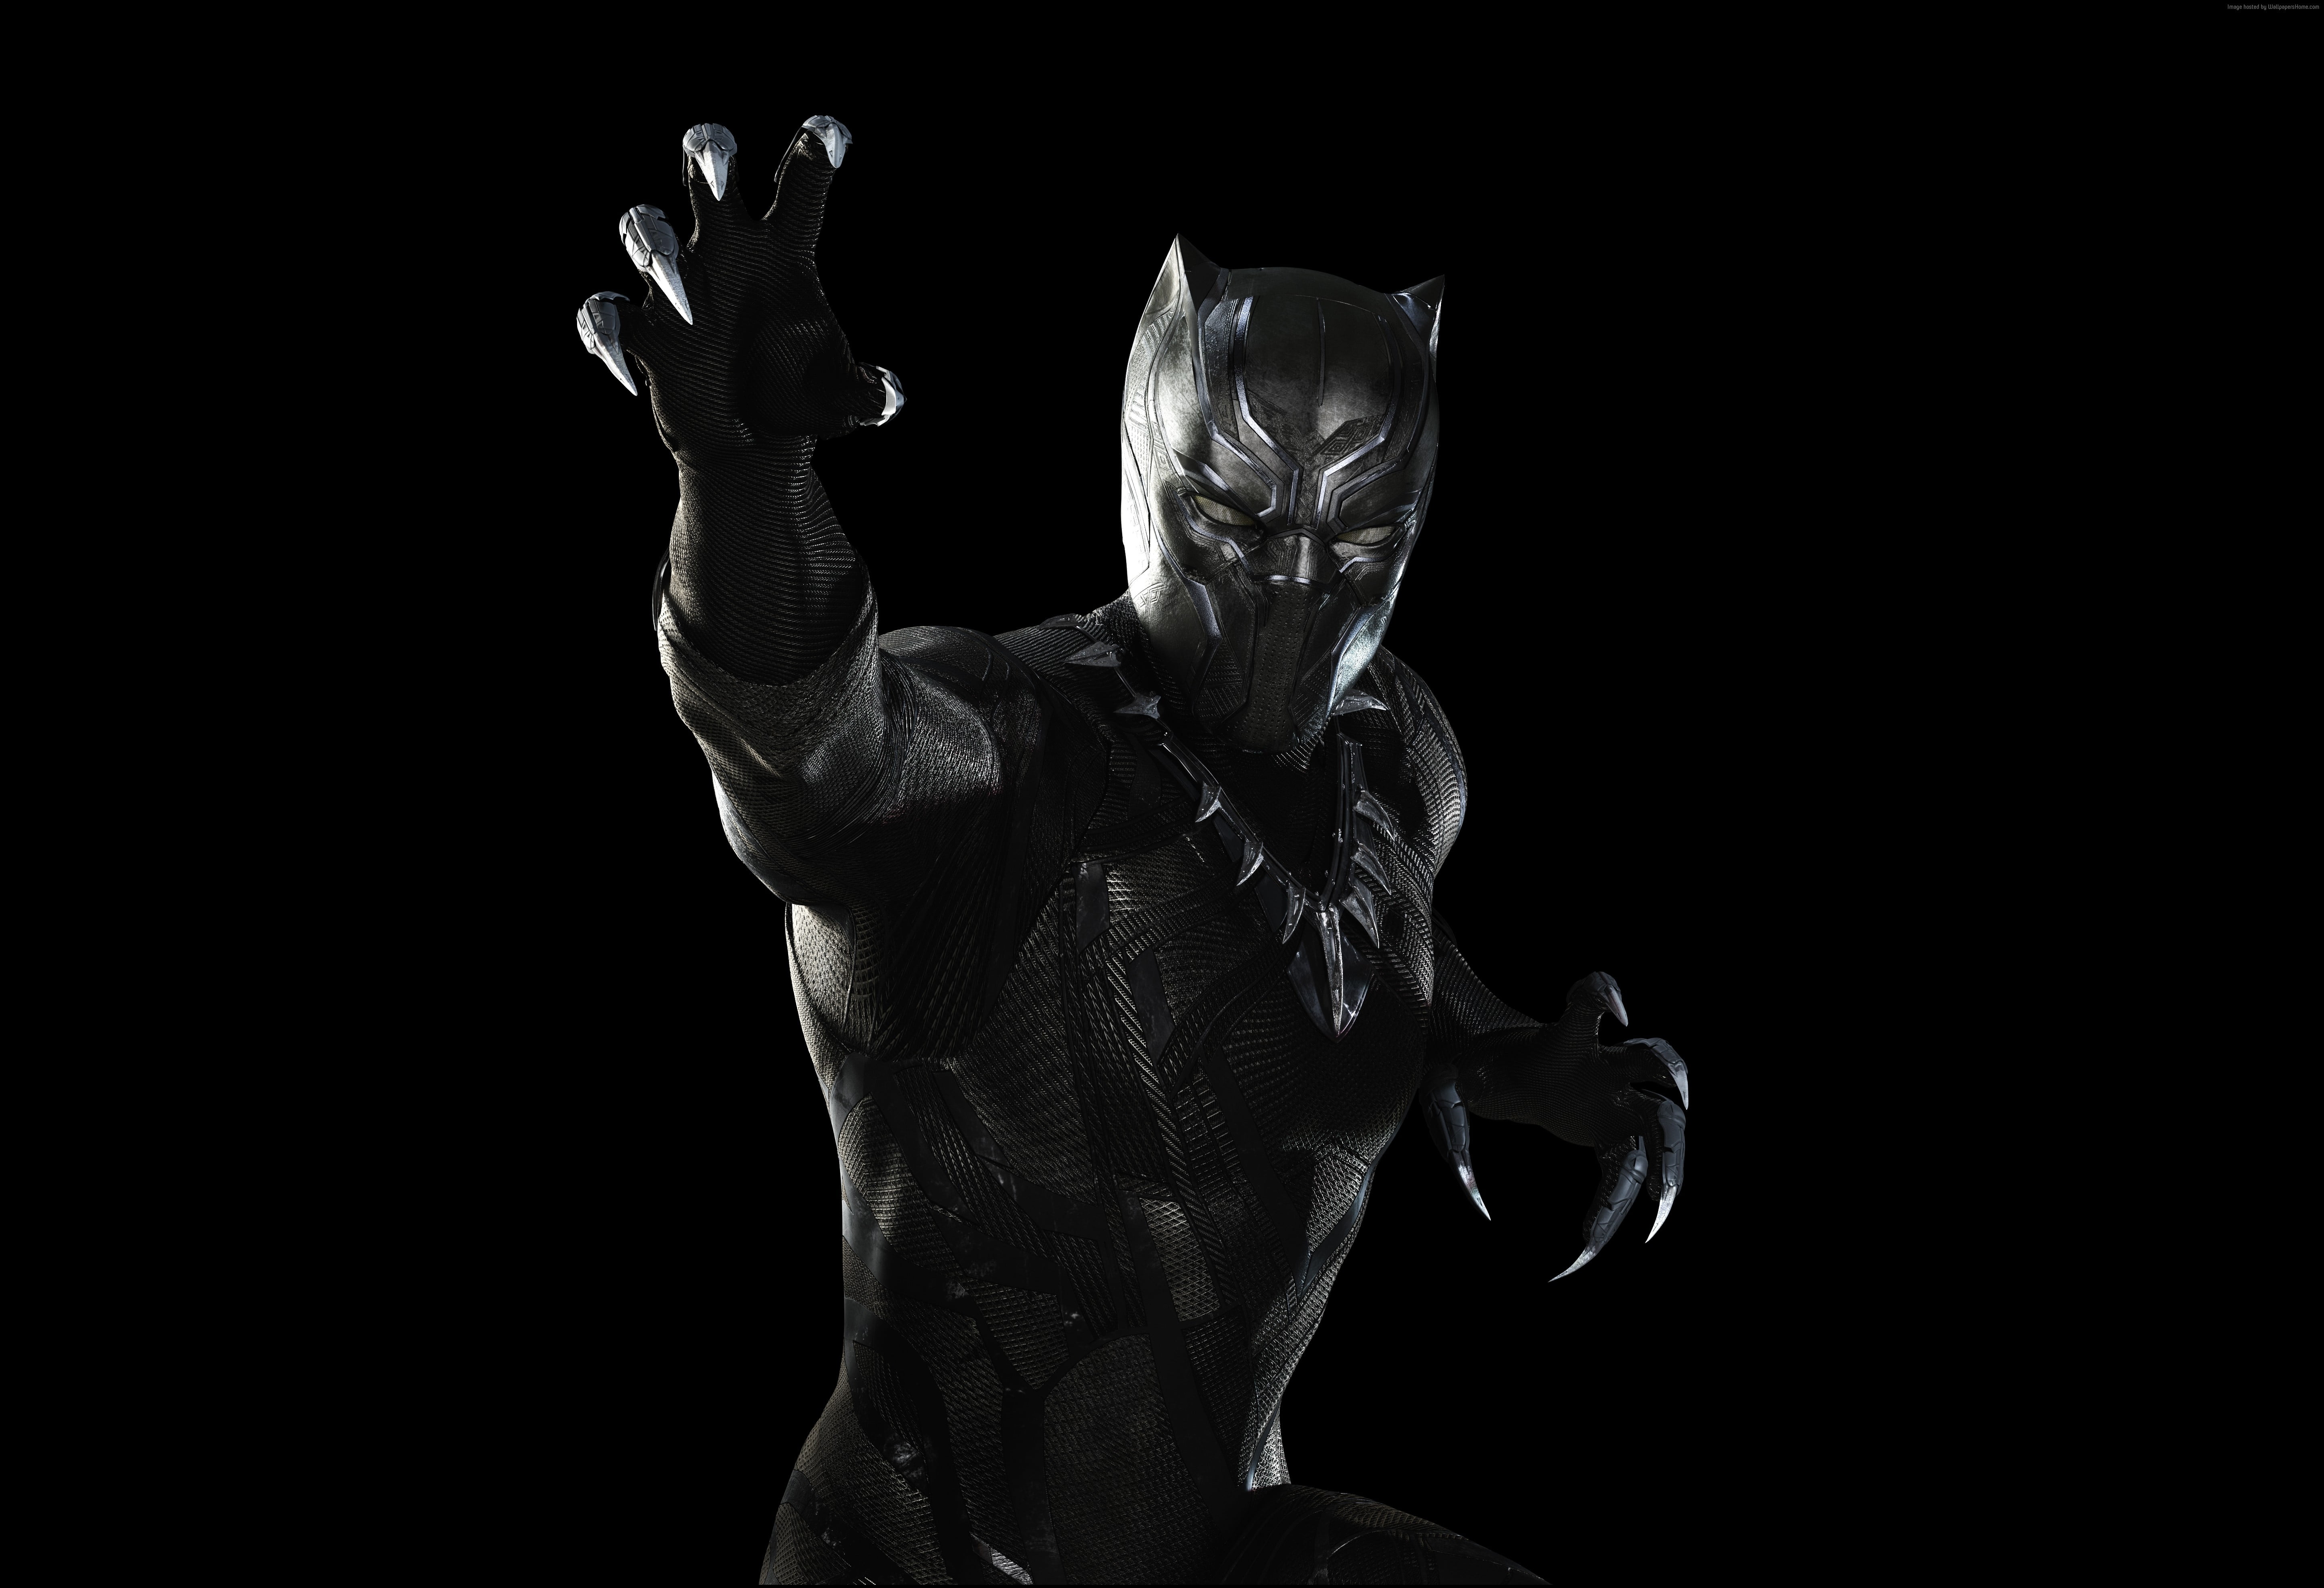 Black Panther from Marvel